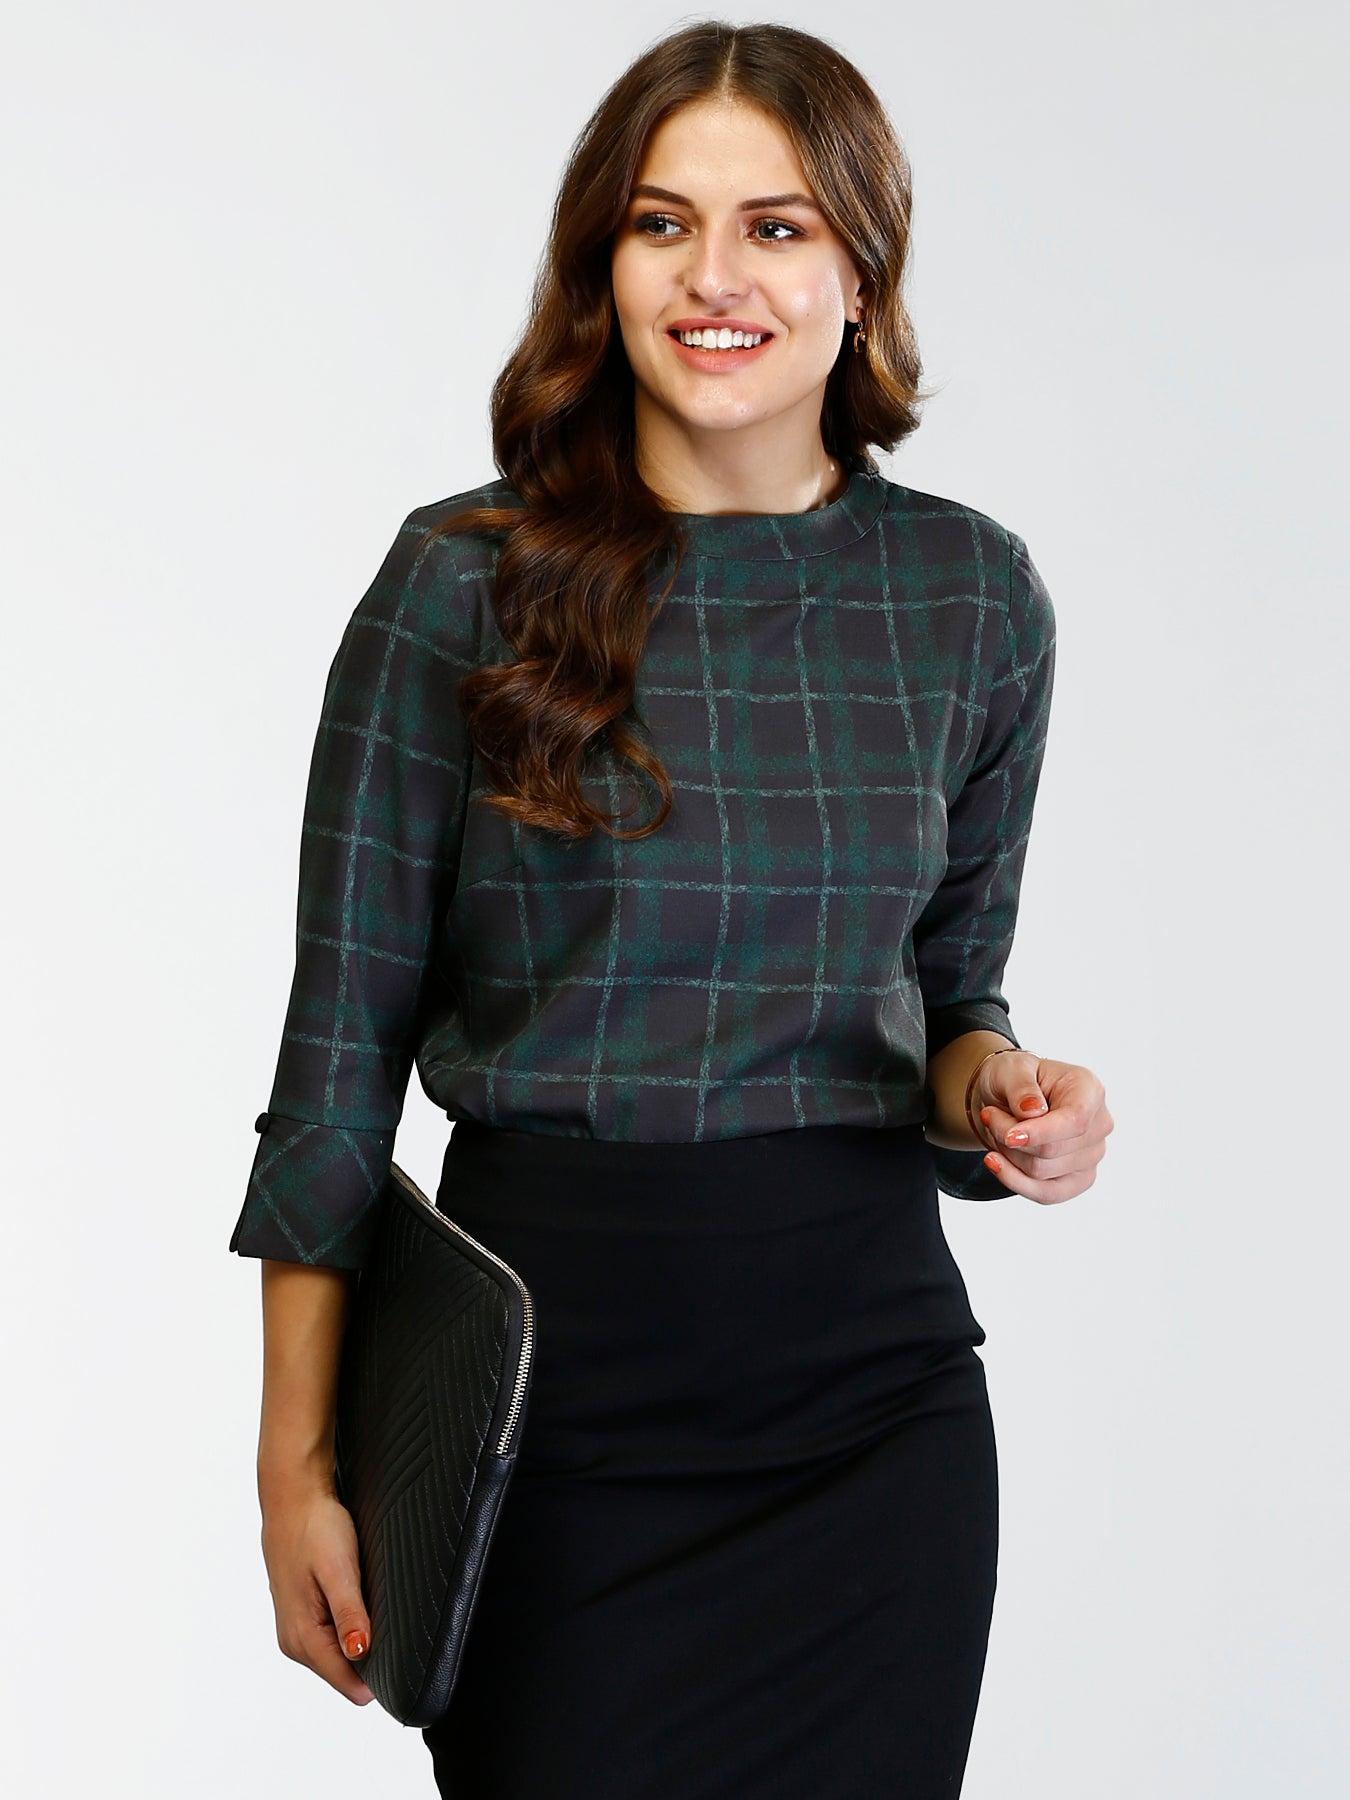 High Round Neck Printed Plaid Top - Black and Green| Formal Tops